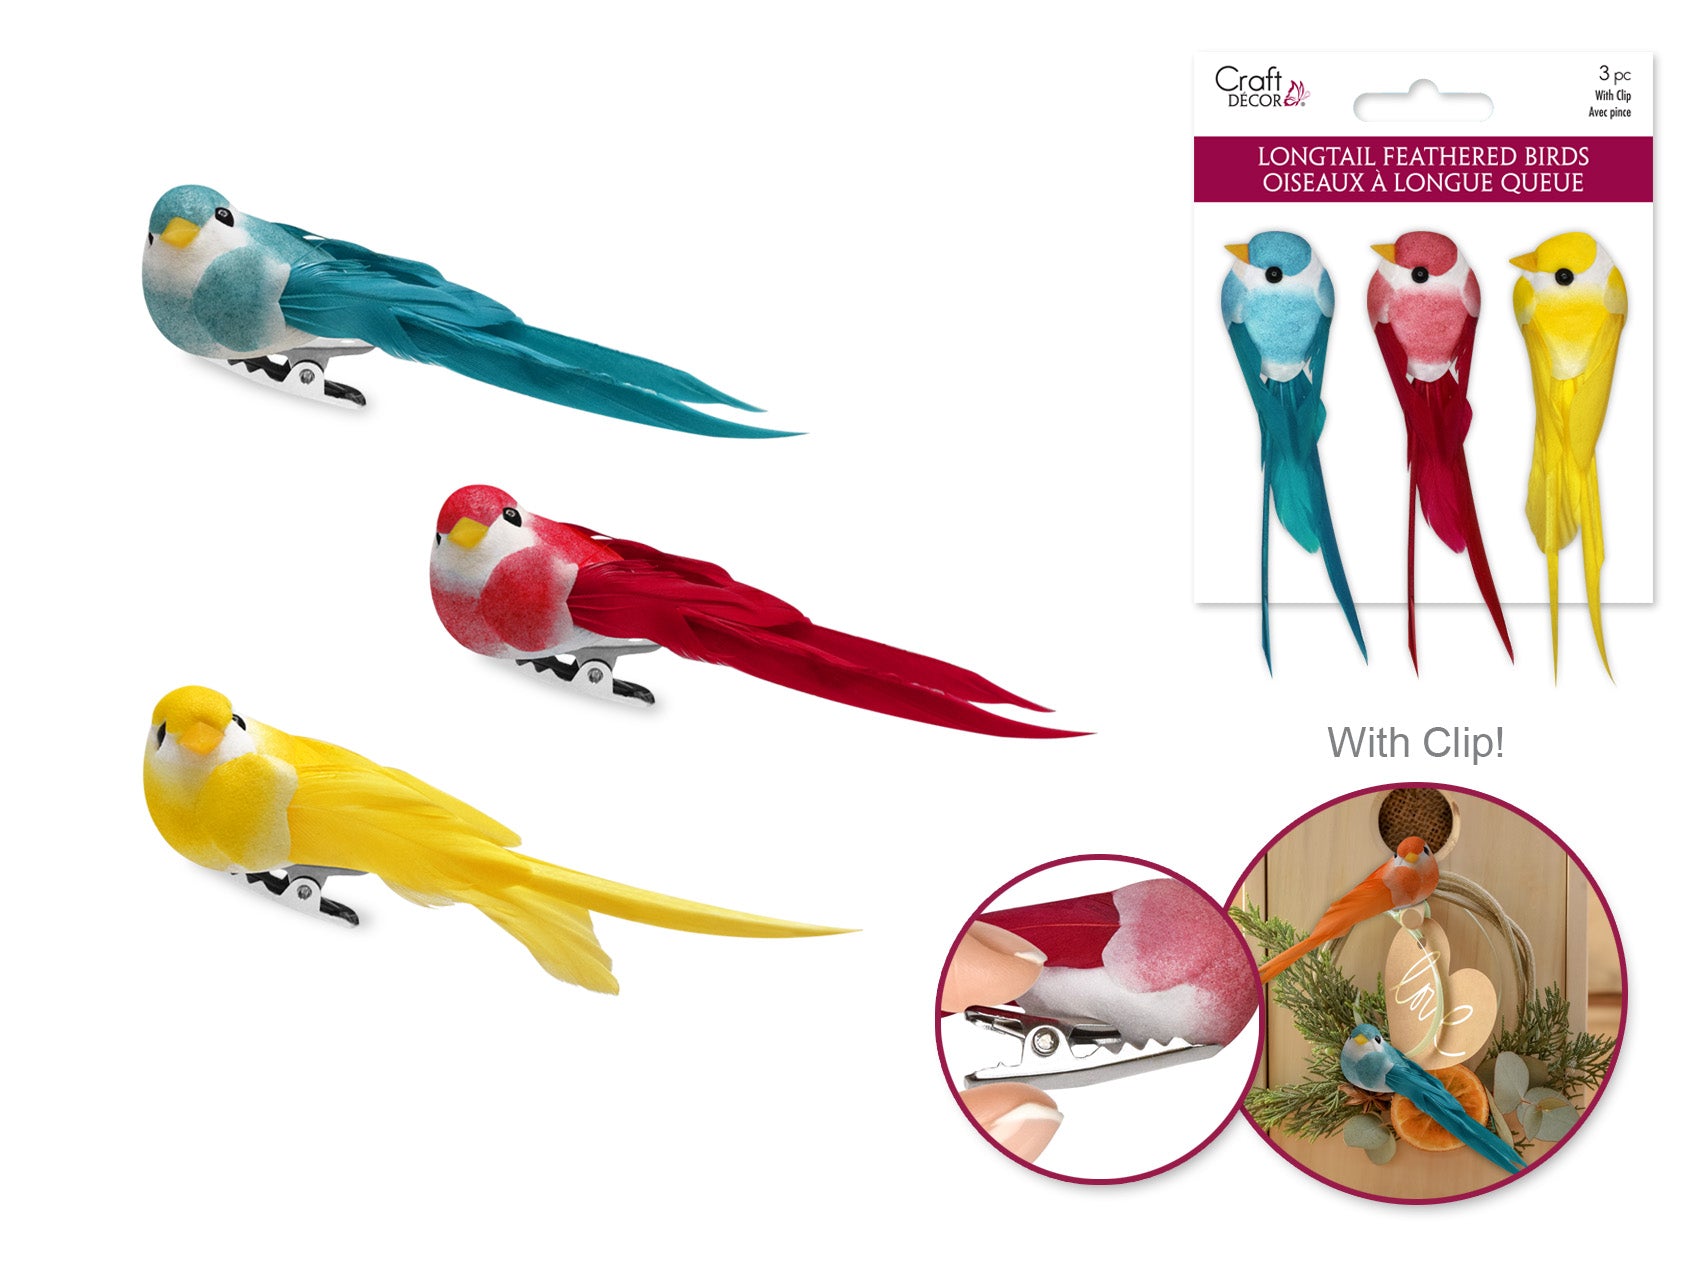 Craft Decor: Set of 3, 3.25" Mini Longtail Birds with Gator Clip in Bright Colors